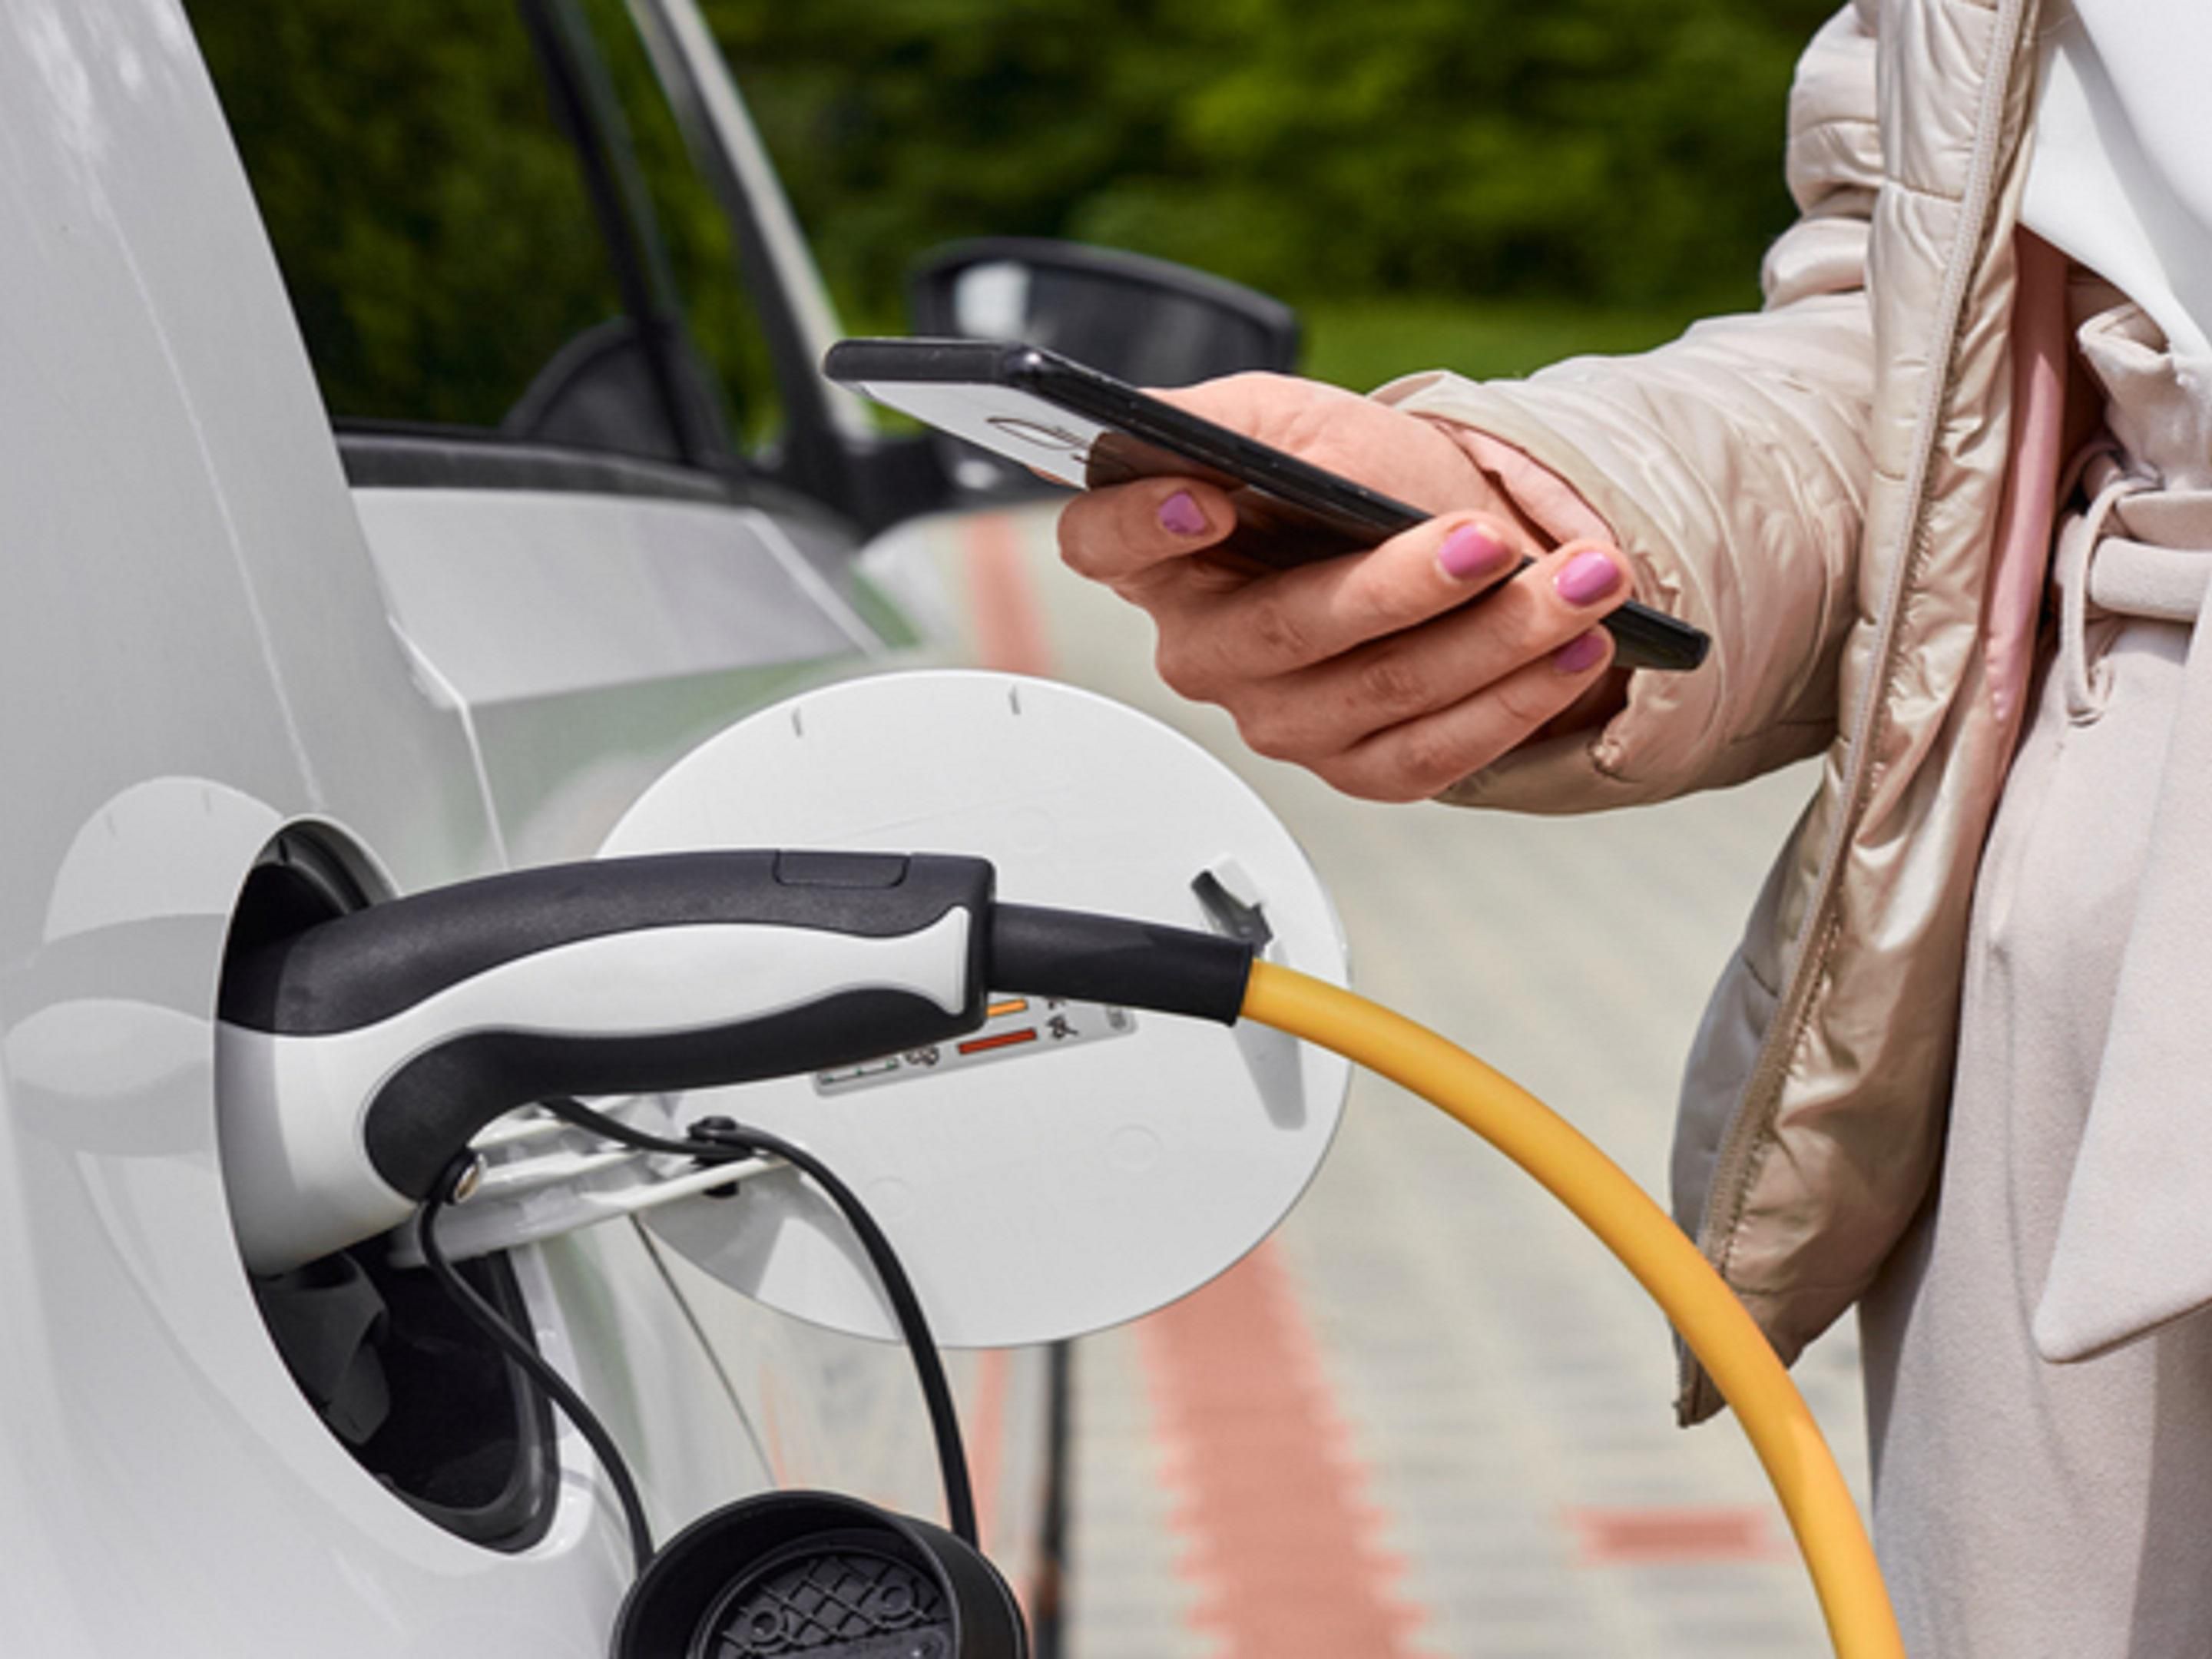 Driving an electric vehicle? Visit one of our convenient electronic charging stations during your stay. Fees are based on usage.